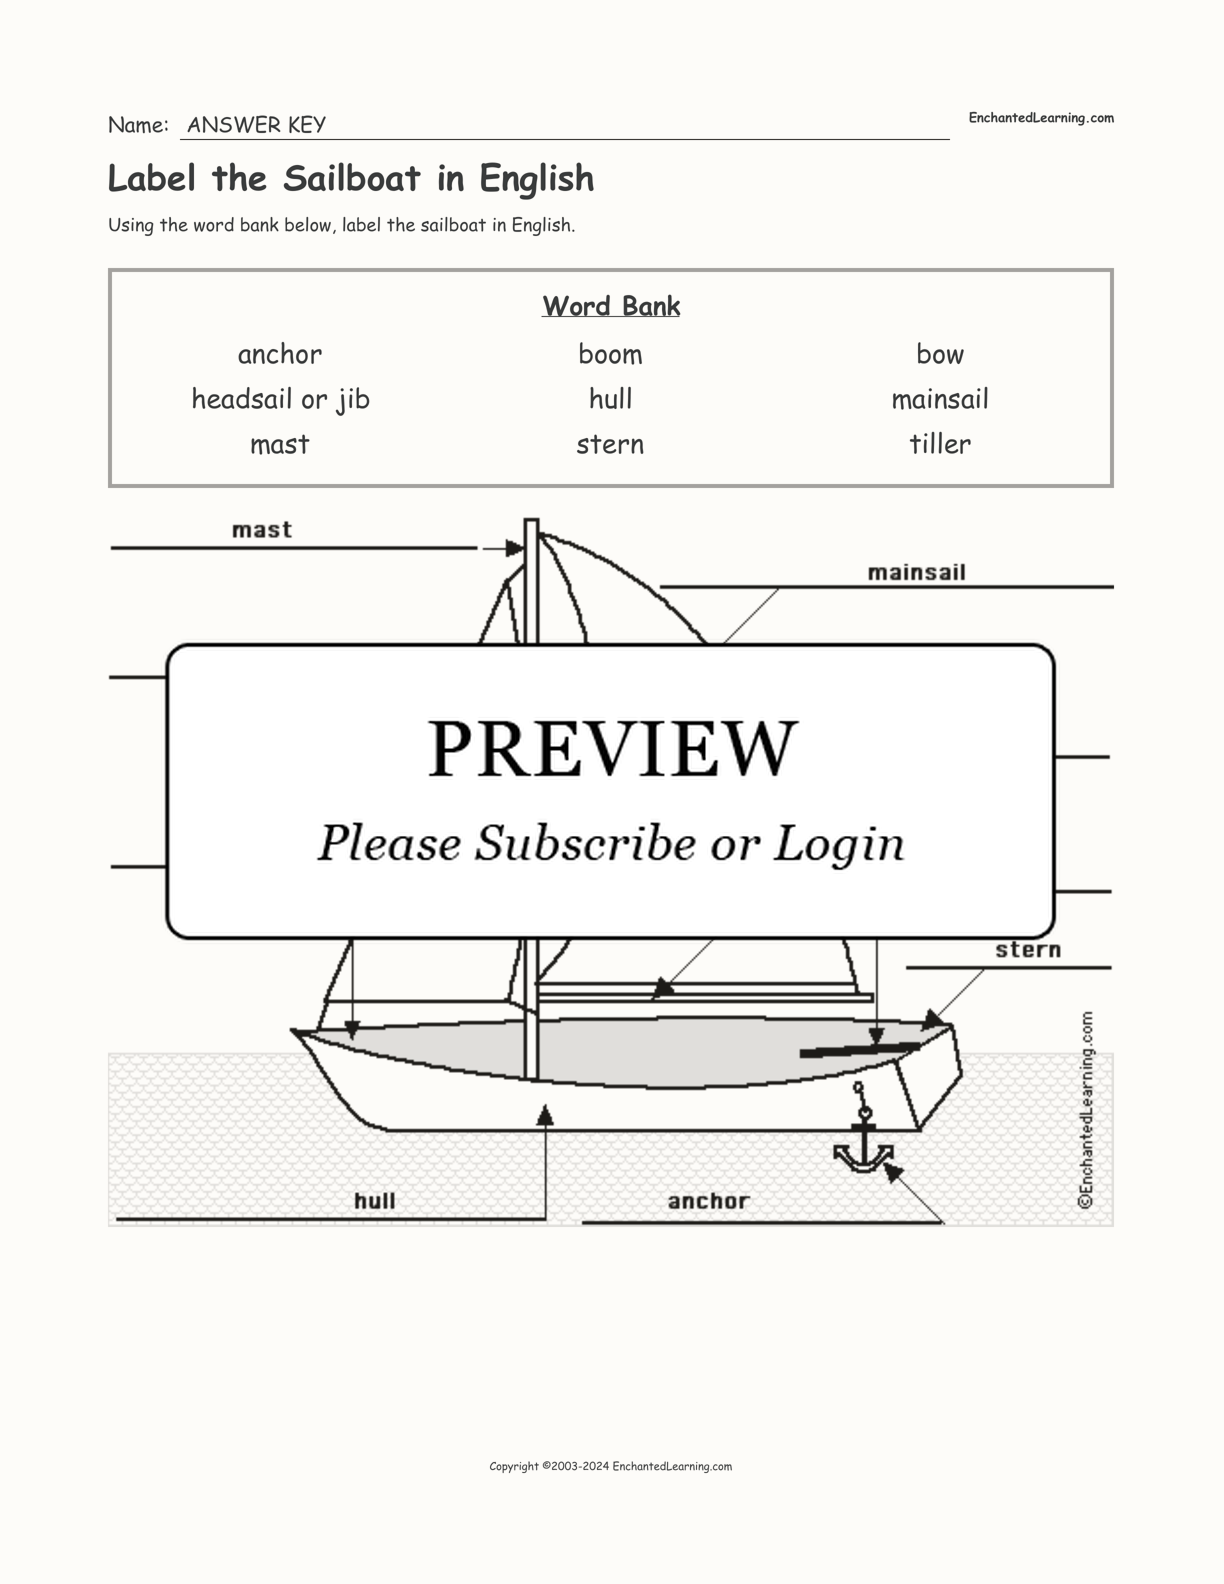 Label the Sailboat in English interactive worksheet page 2